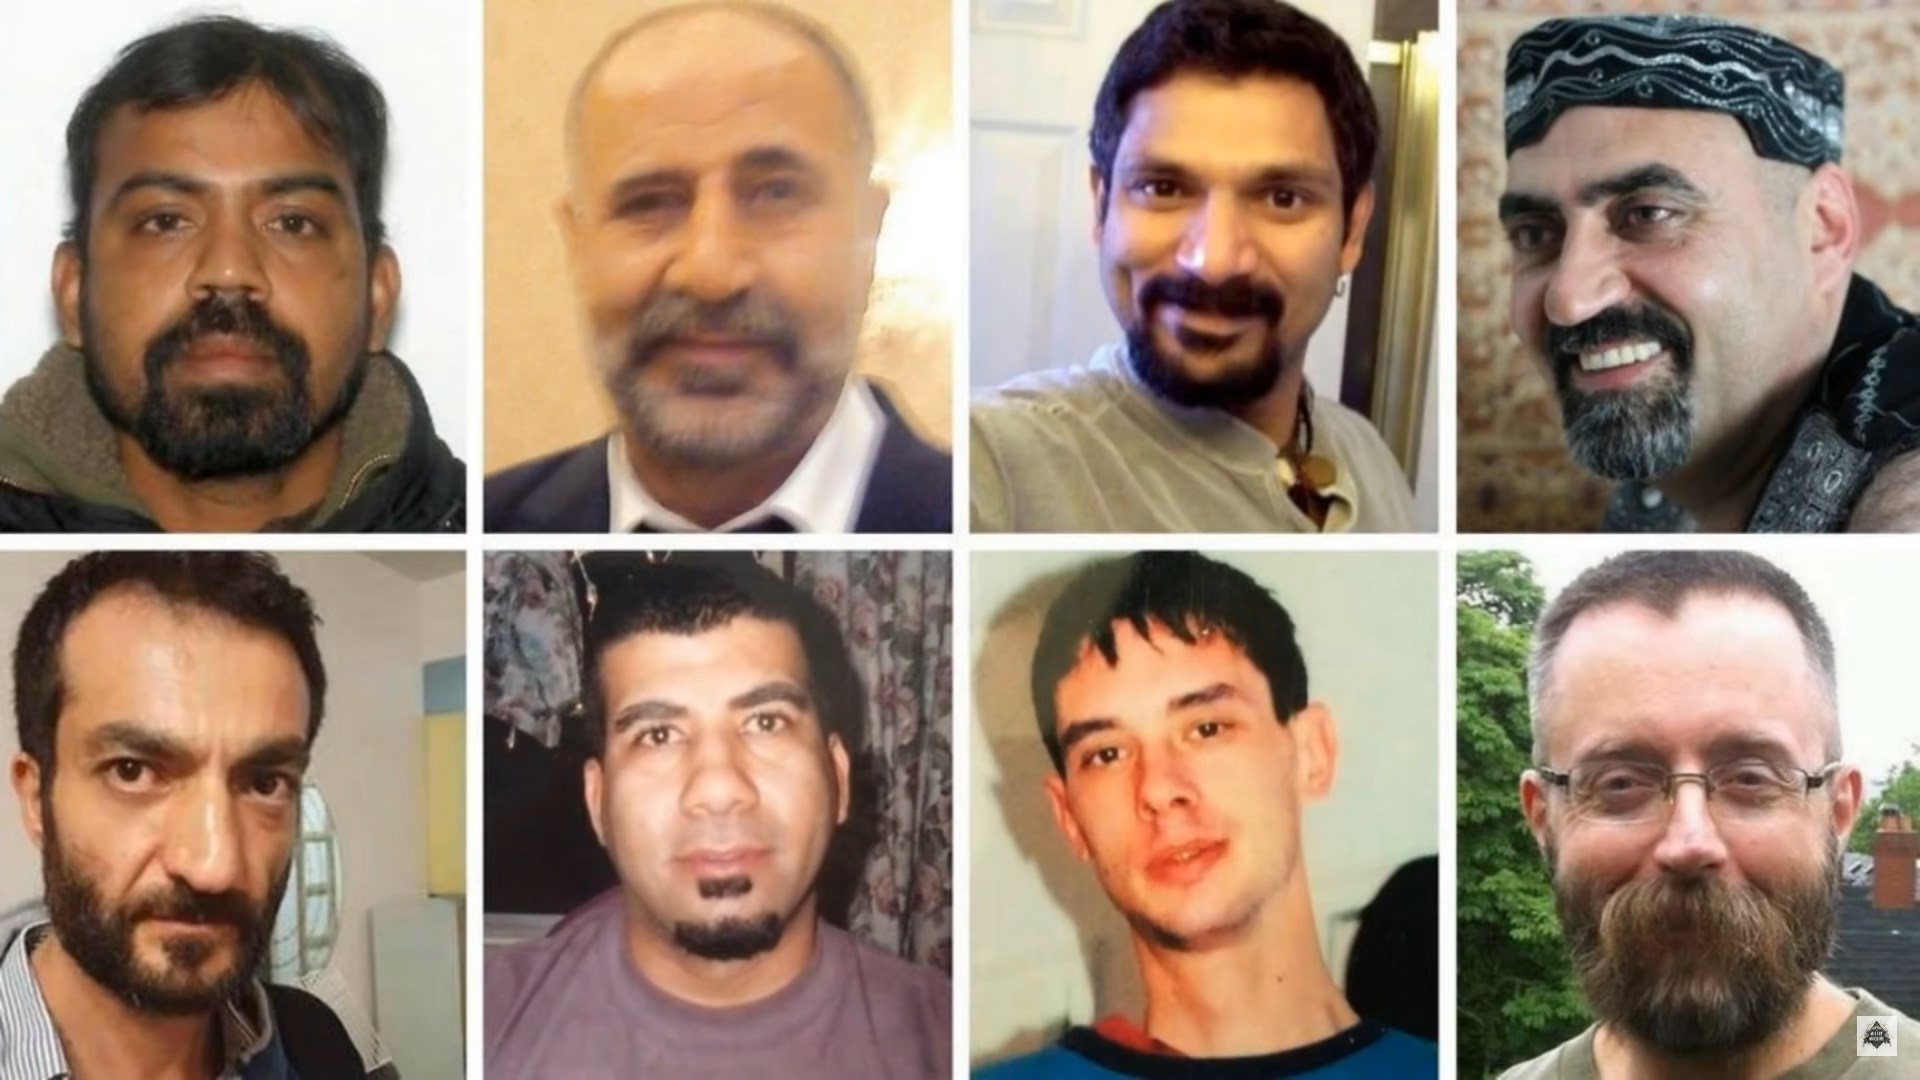 The victims of Bruce McArthur